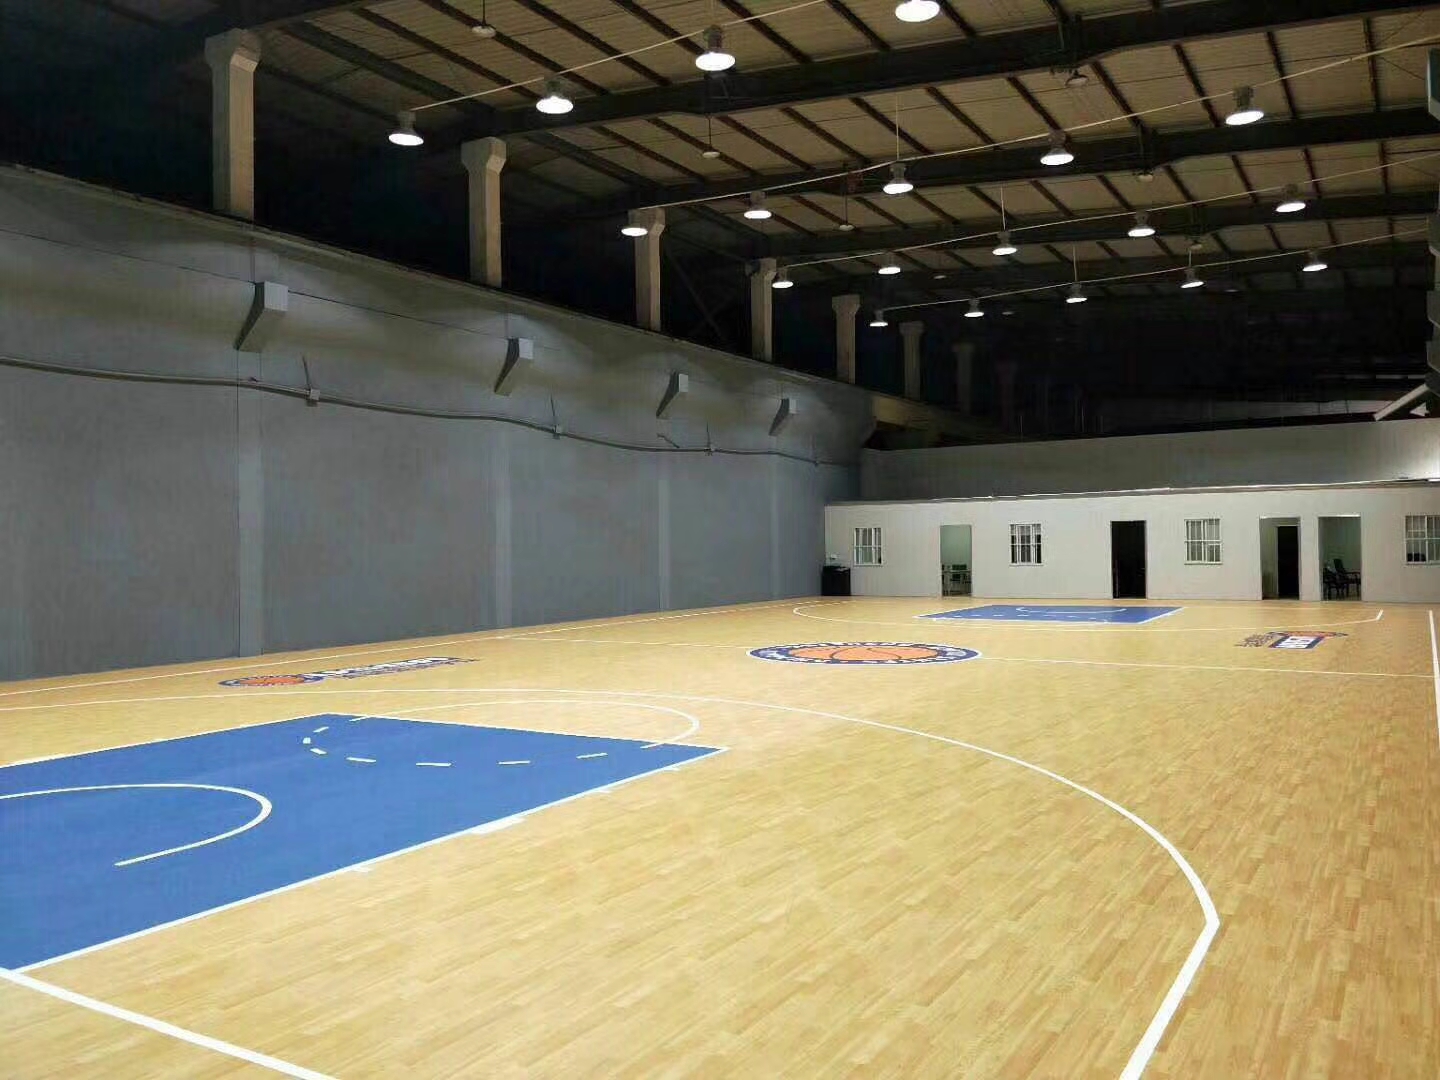 How to avoid pits for basketball court pvc flooring?